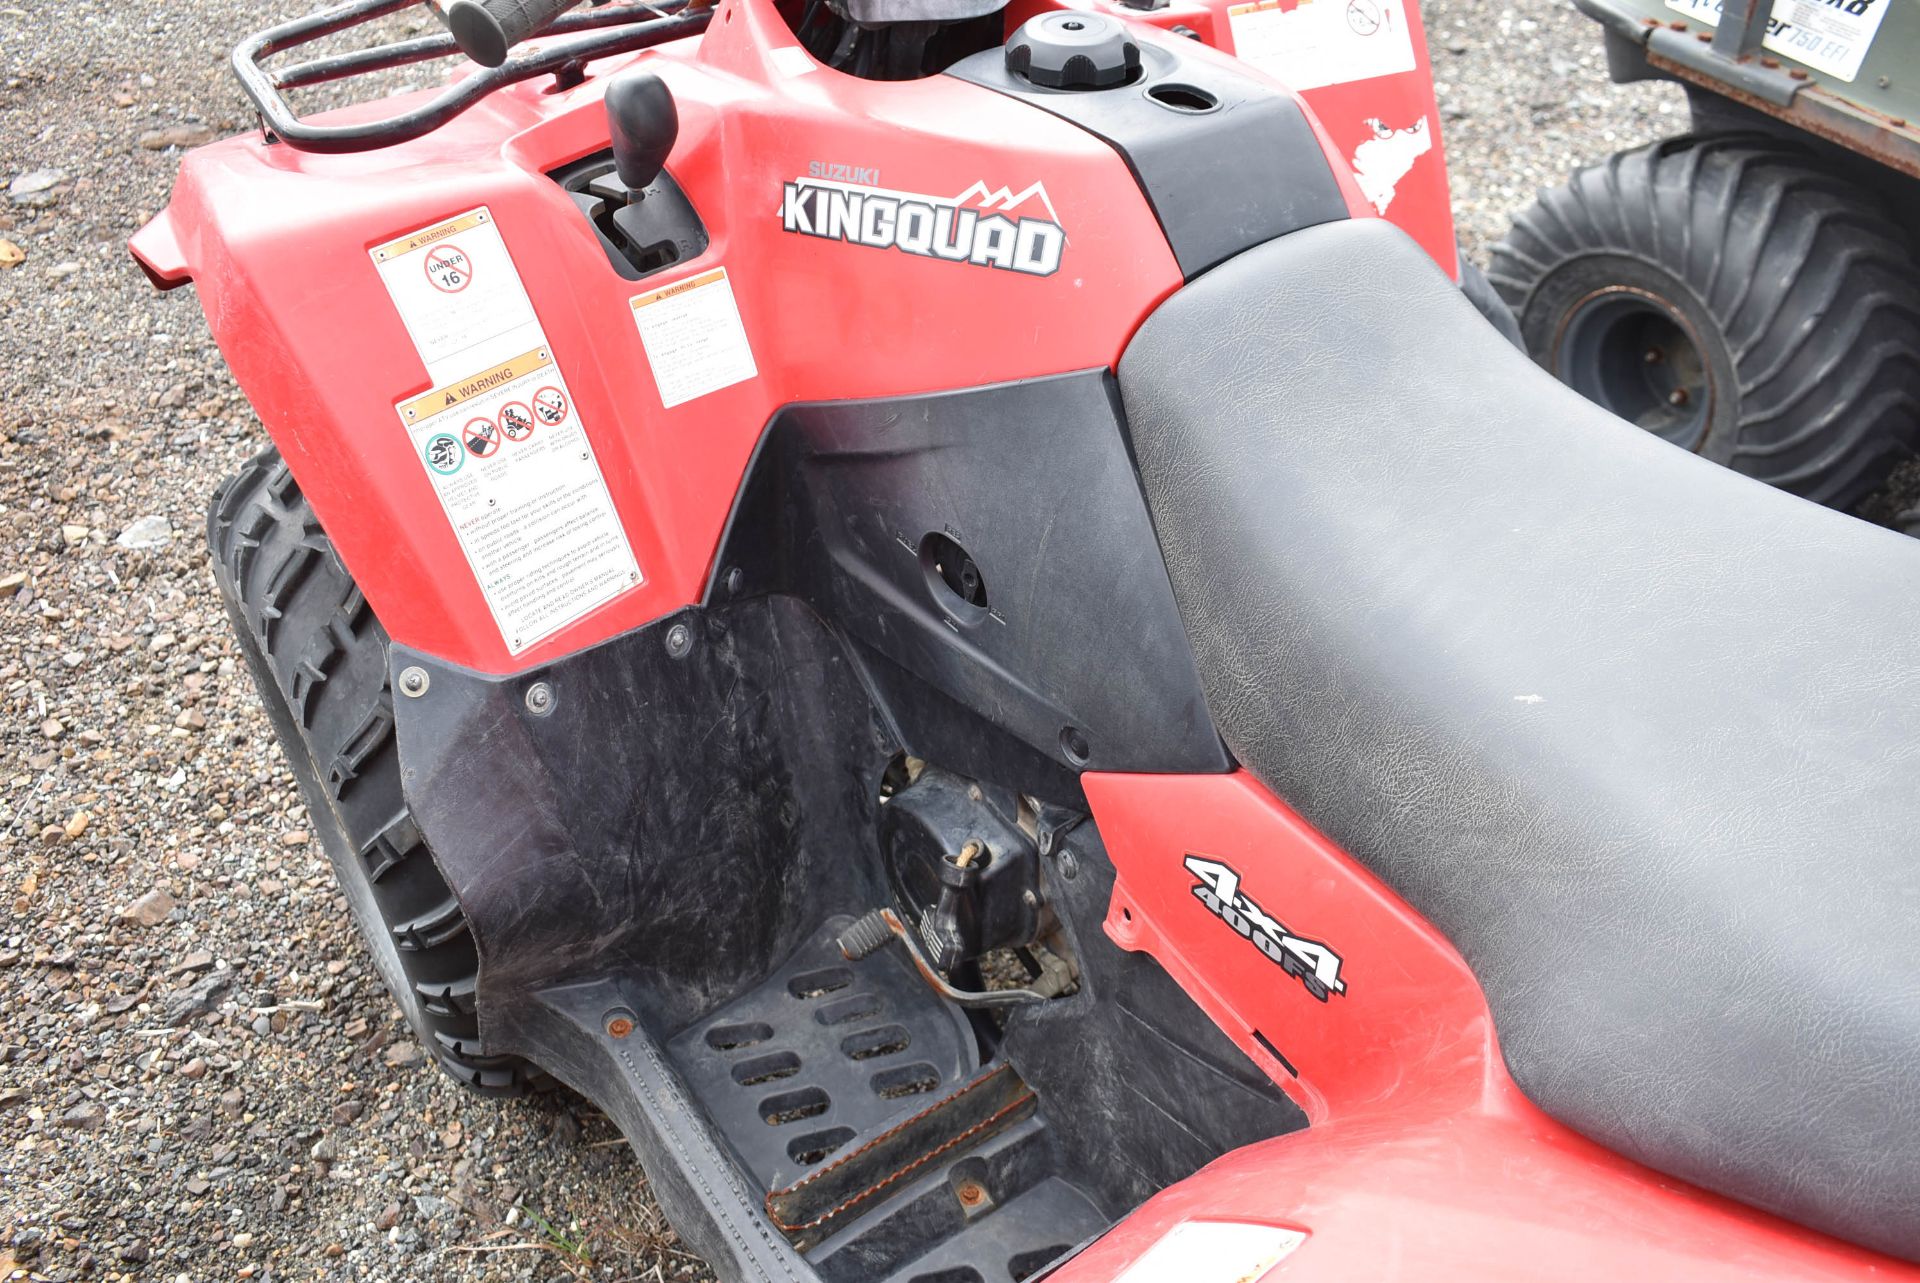 SUZUKI (2008) KING QUAD 400FSI 4X4 ATV WITH 2,711 KM (RECORDED ON ODOMETER AT TIME OF LISTING), VIN: - Image 7 of 12